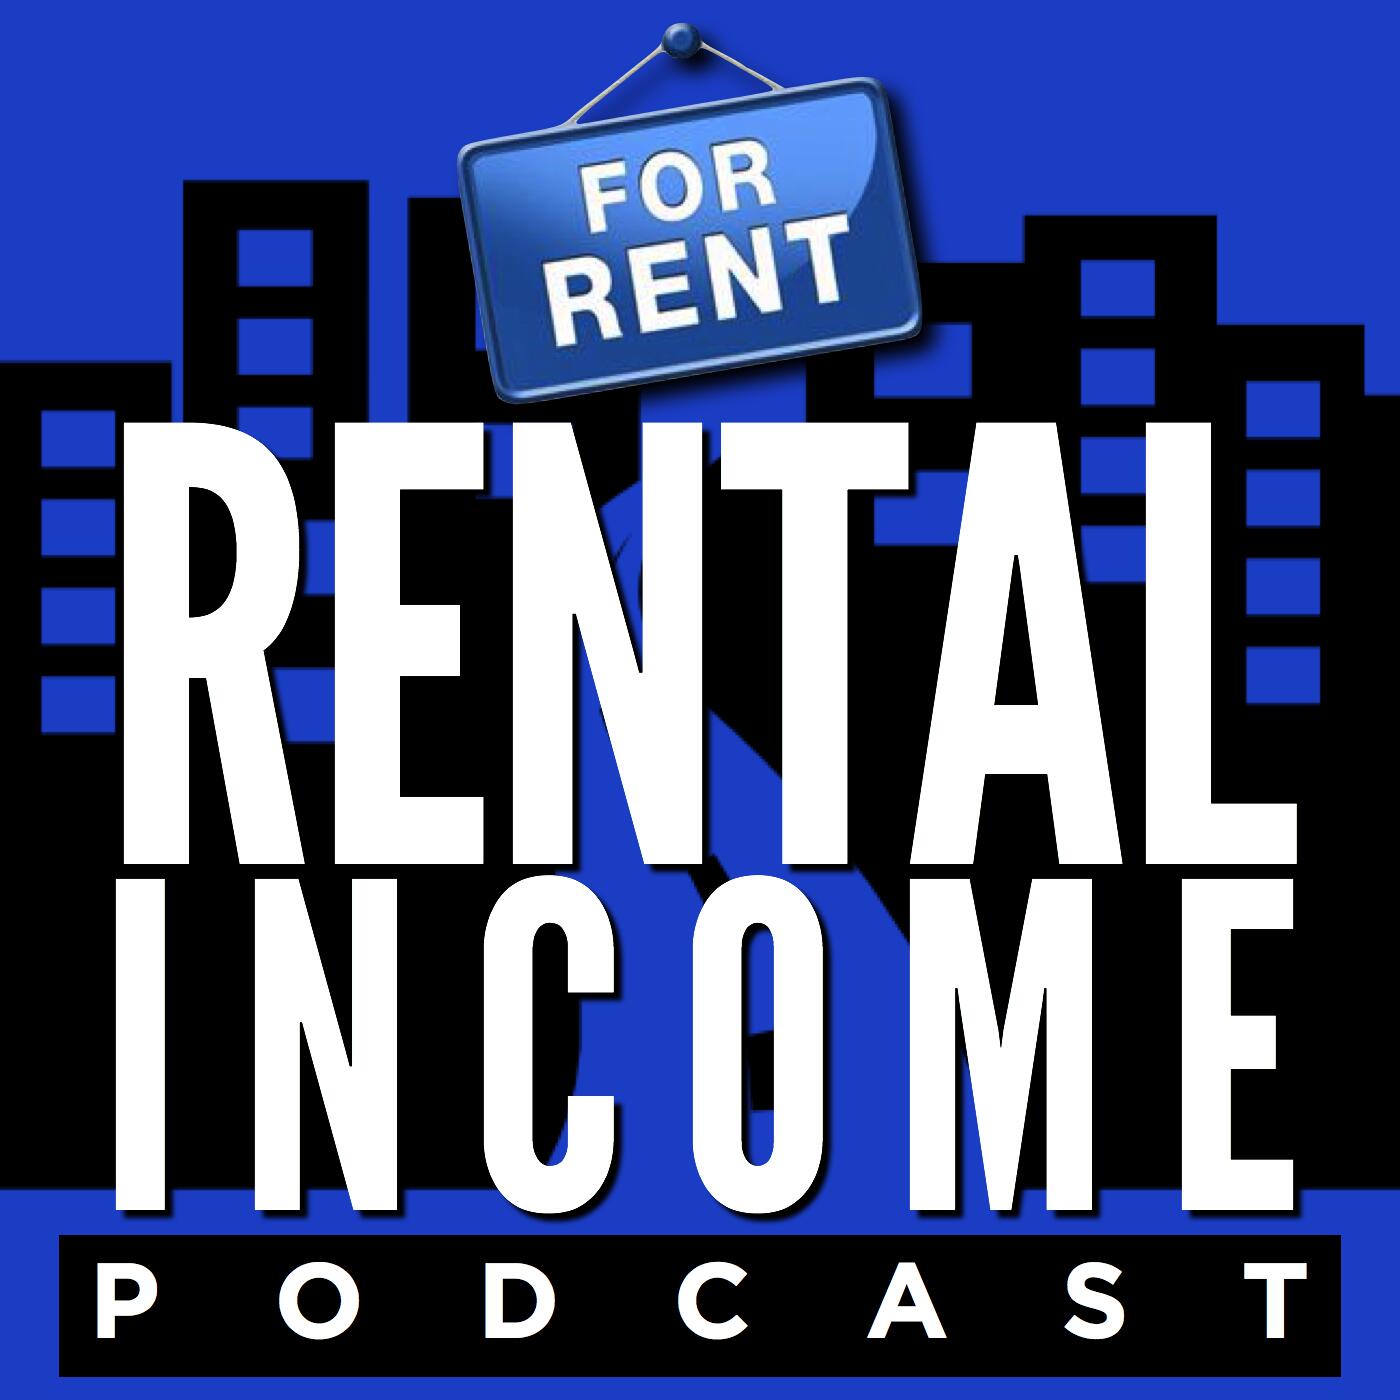 Rent Income. Rent up